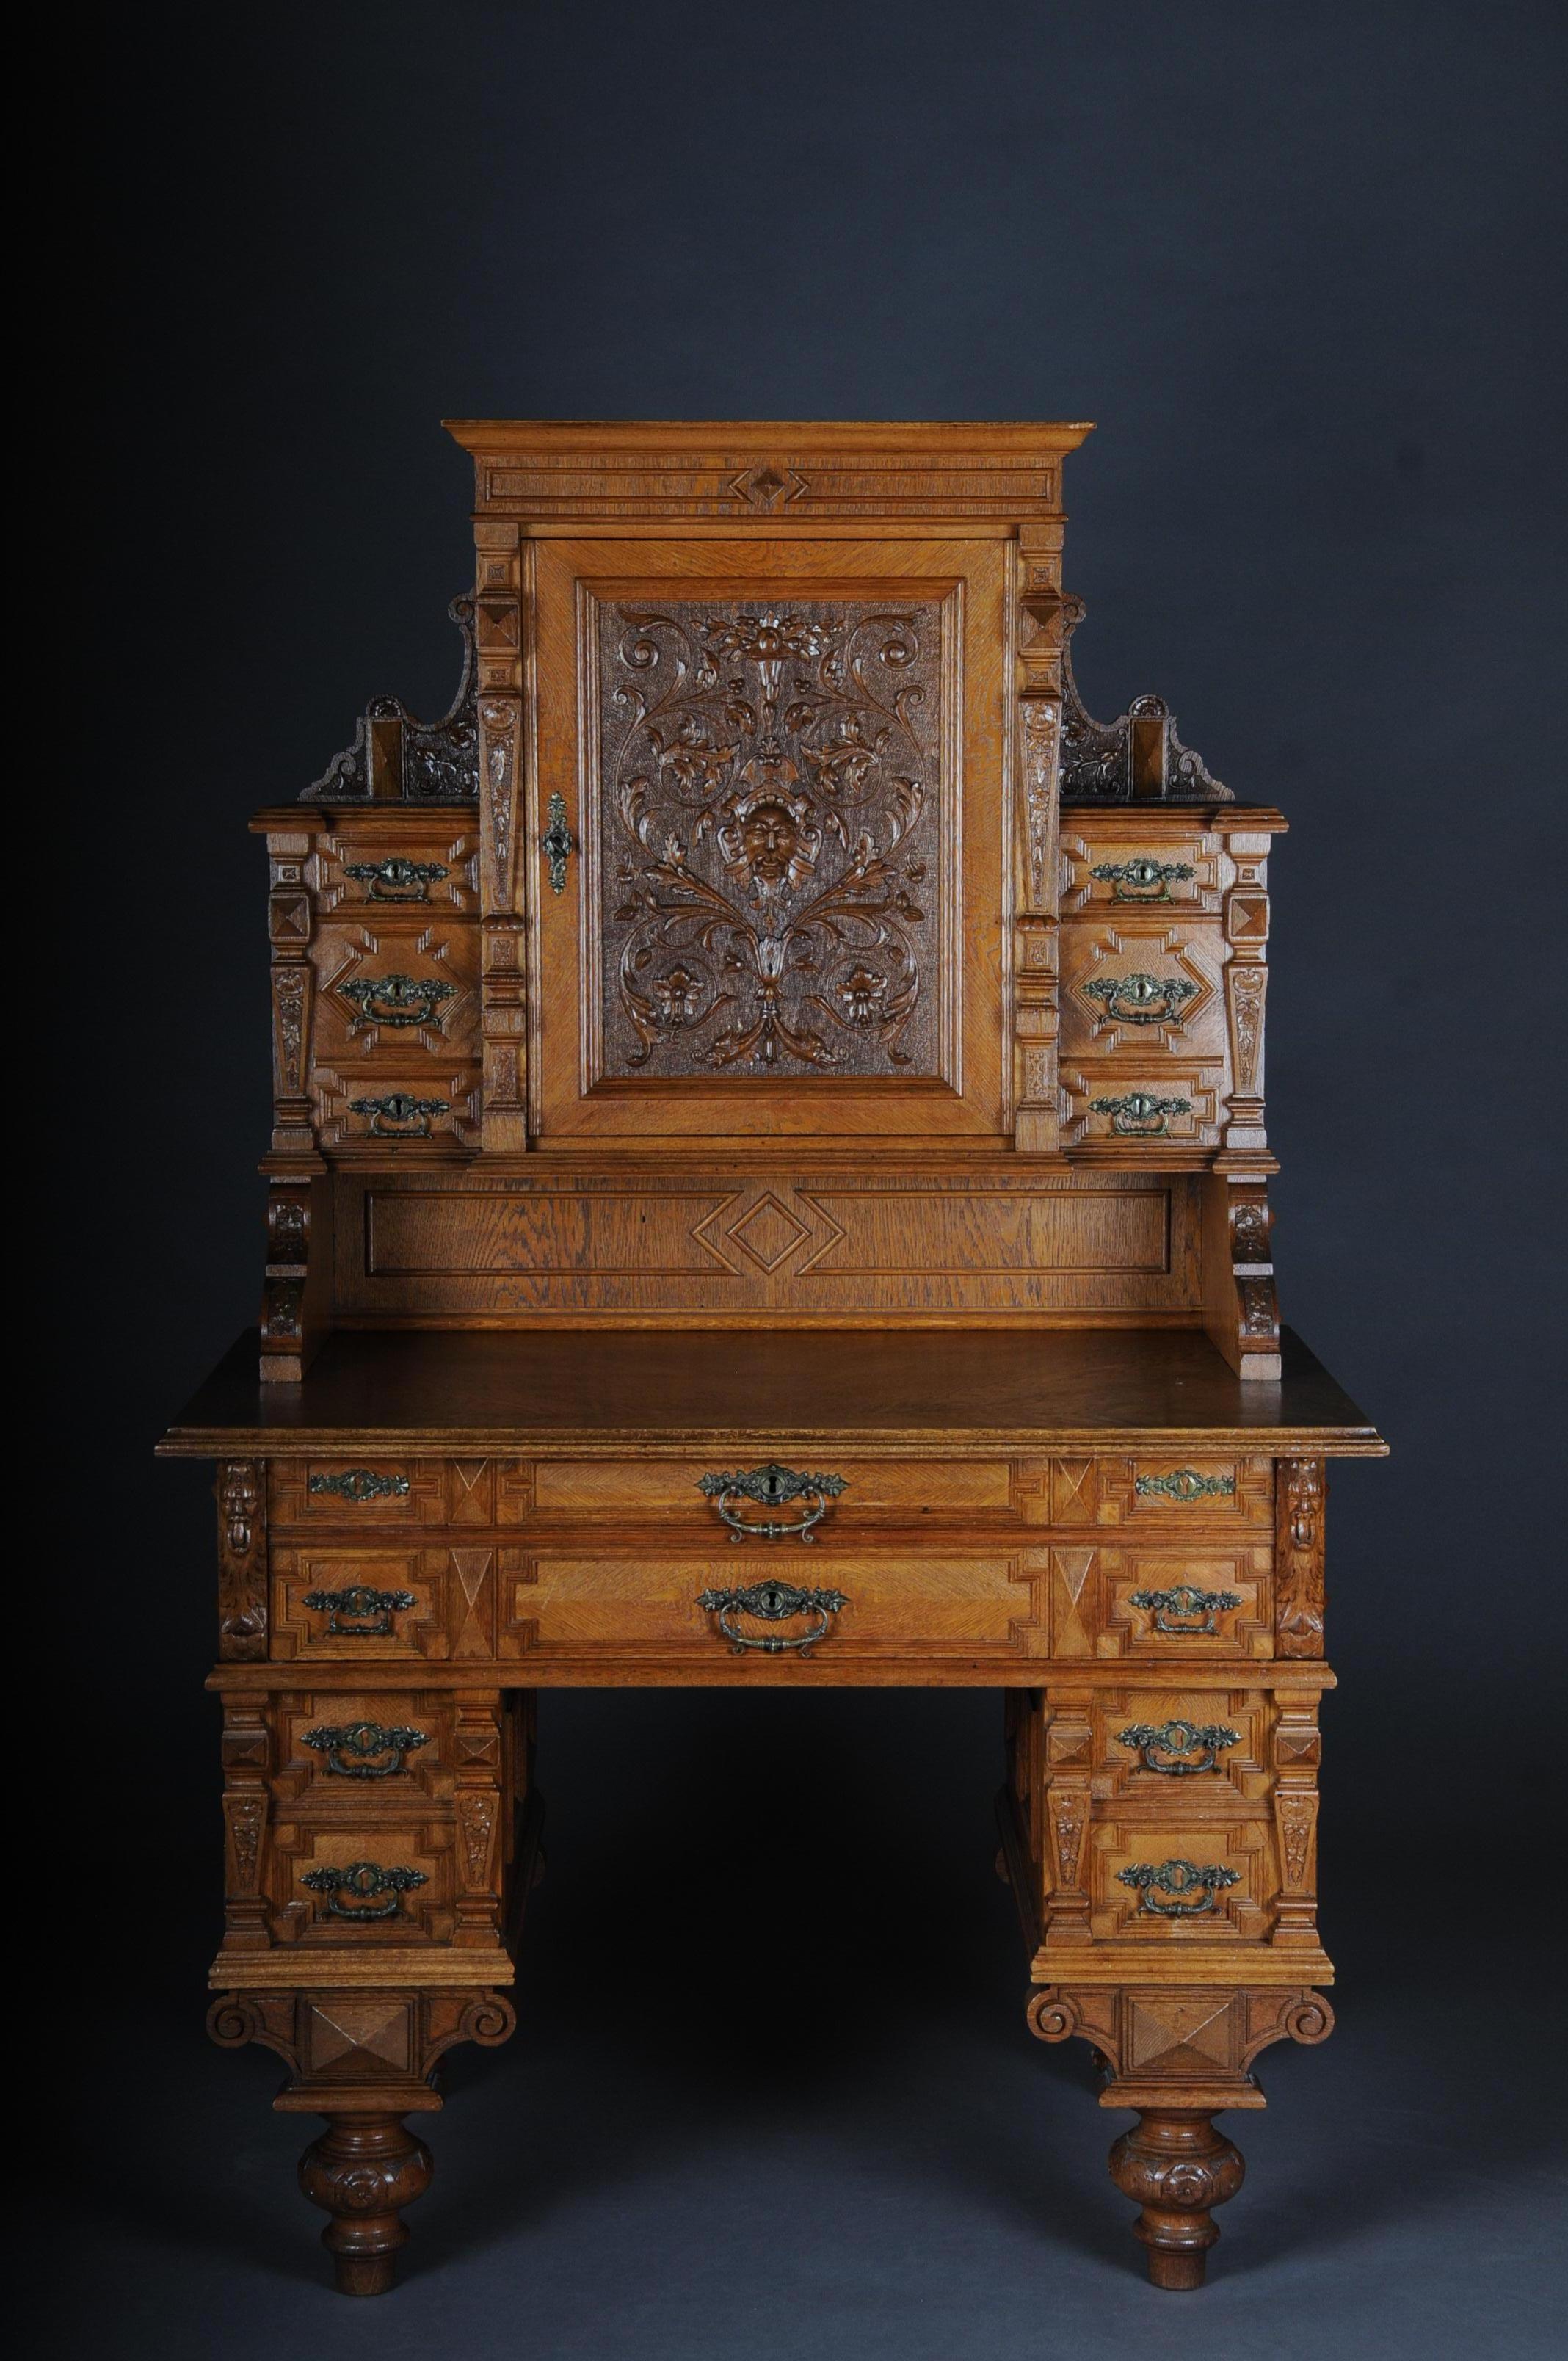 Historism essay desk / secretary circa 1870 light oak.

Solid wood body, oak partially veneered. Richly carved structure and substructure.
With various drawers. A large single-door storage space in the middle. Wide writing surface.
Very fine and